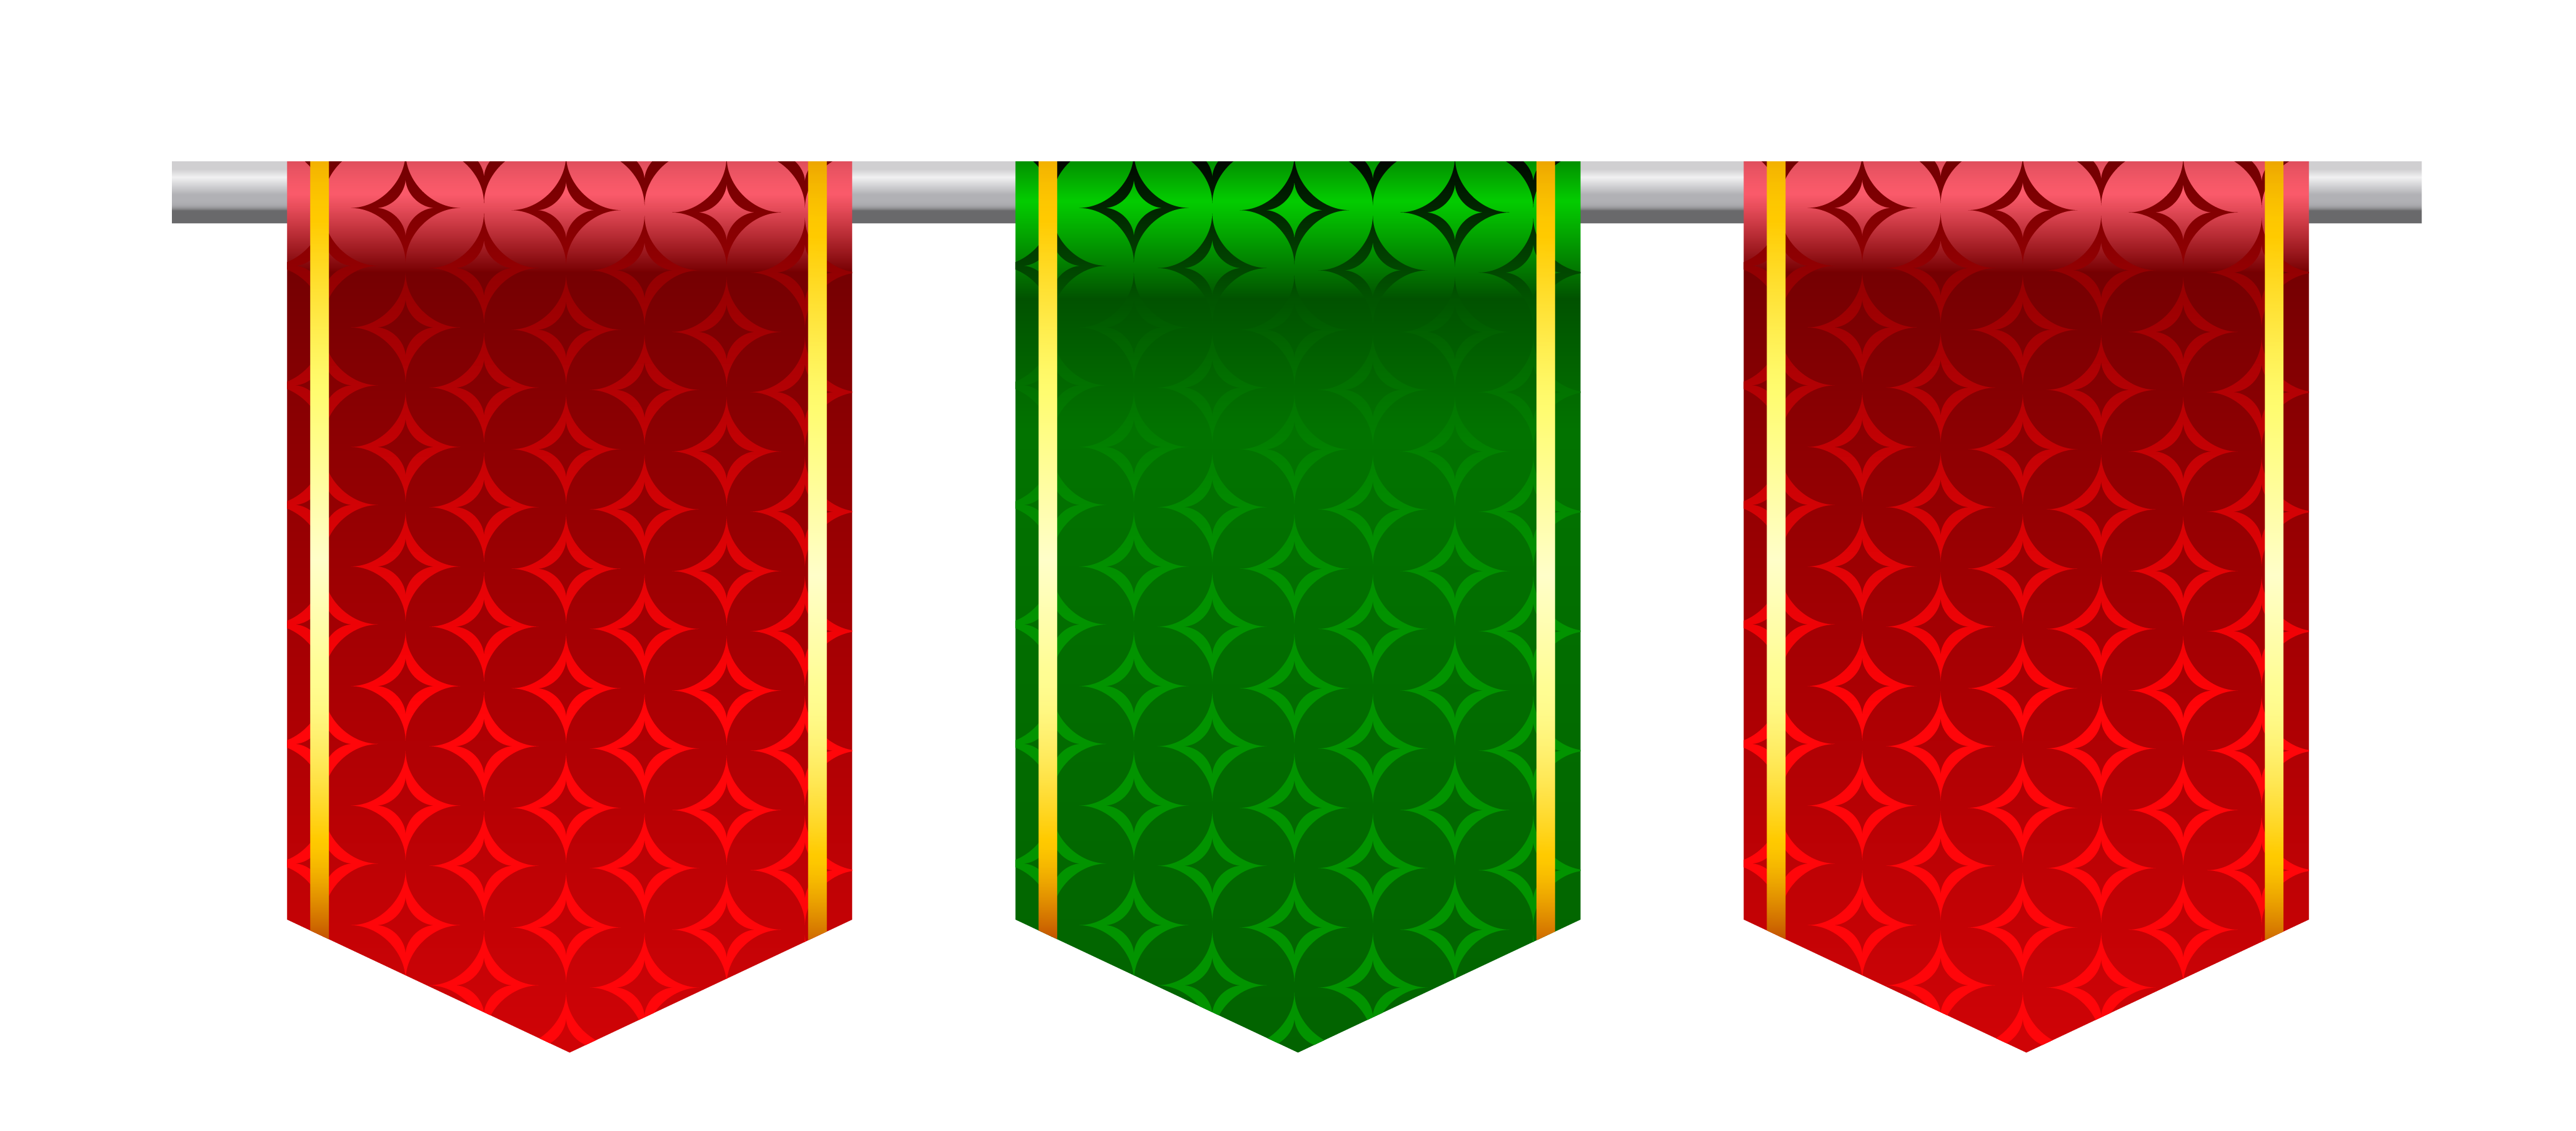 Red and green flags. Pattern clipart banner